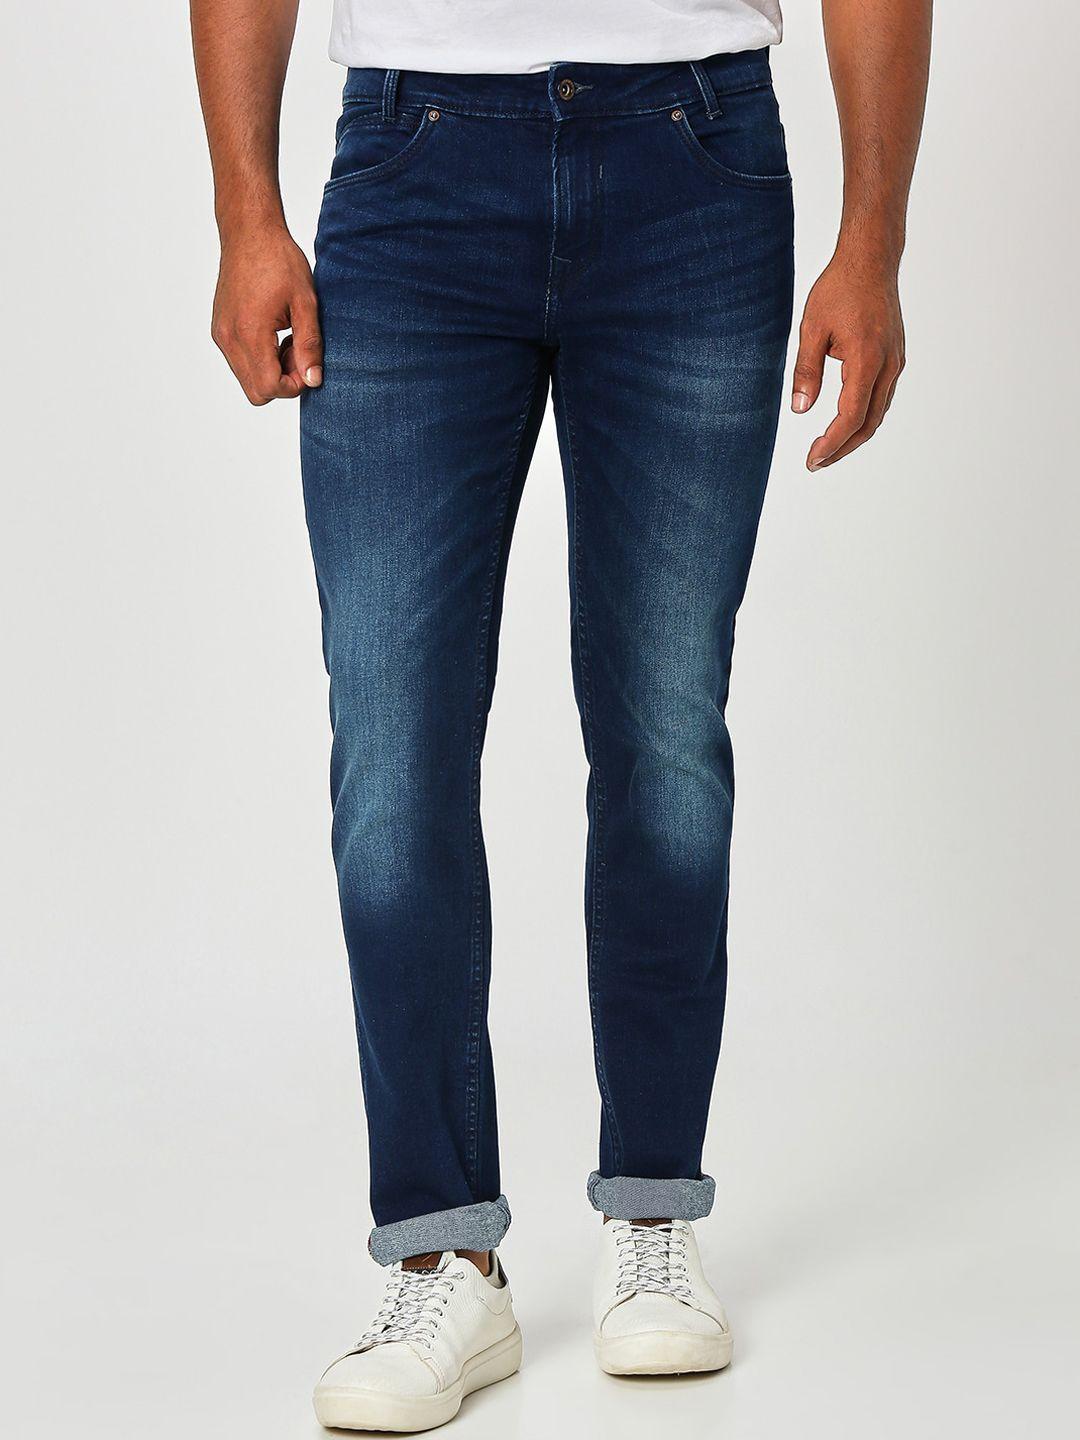 mufti-men-mid-rise-slim-fit-clean-look-heavy-fade-stretchable-jeans